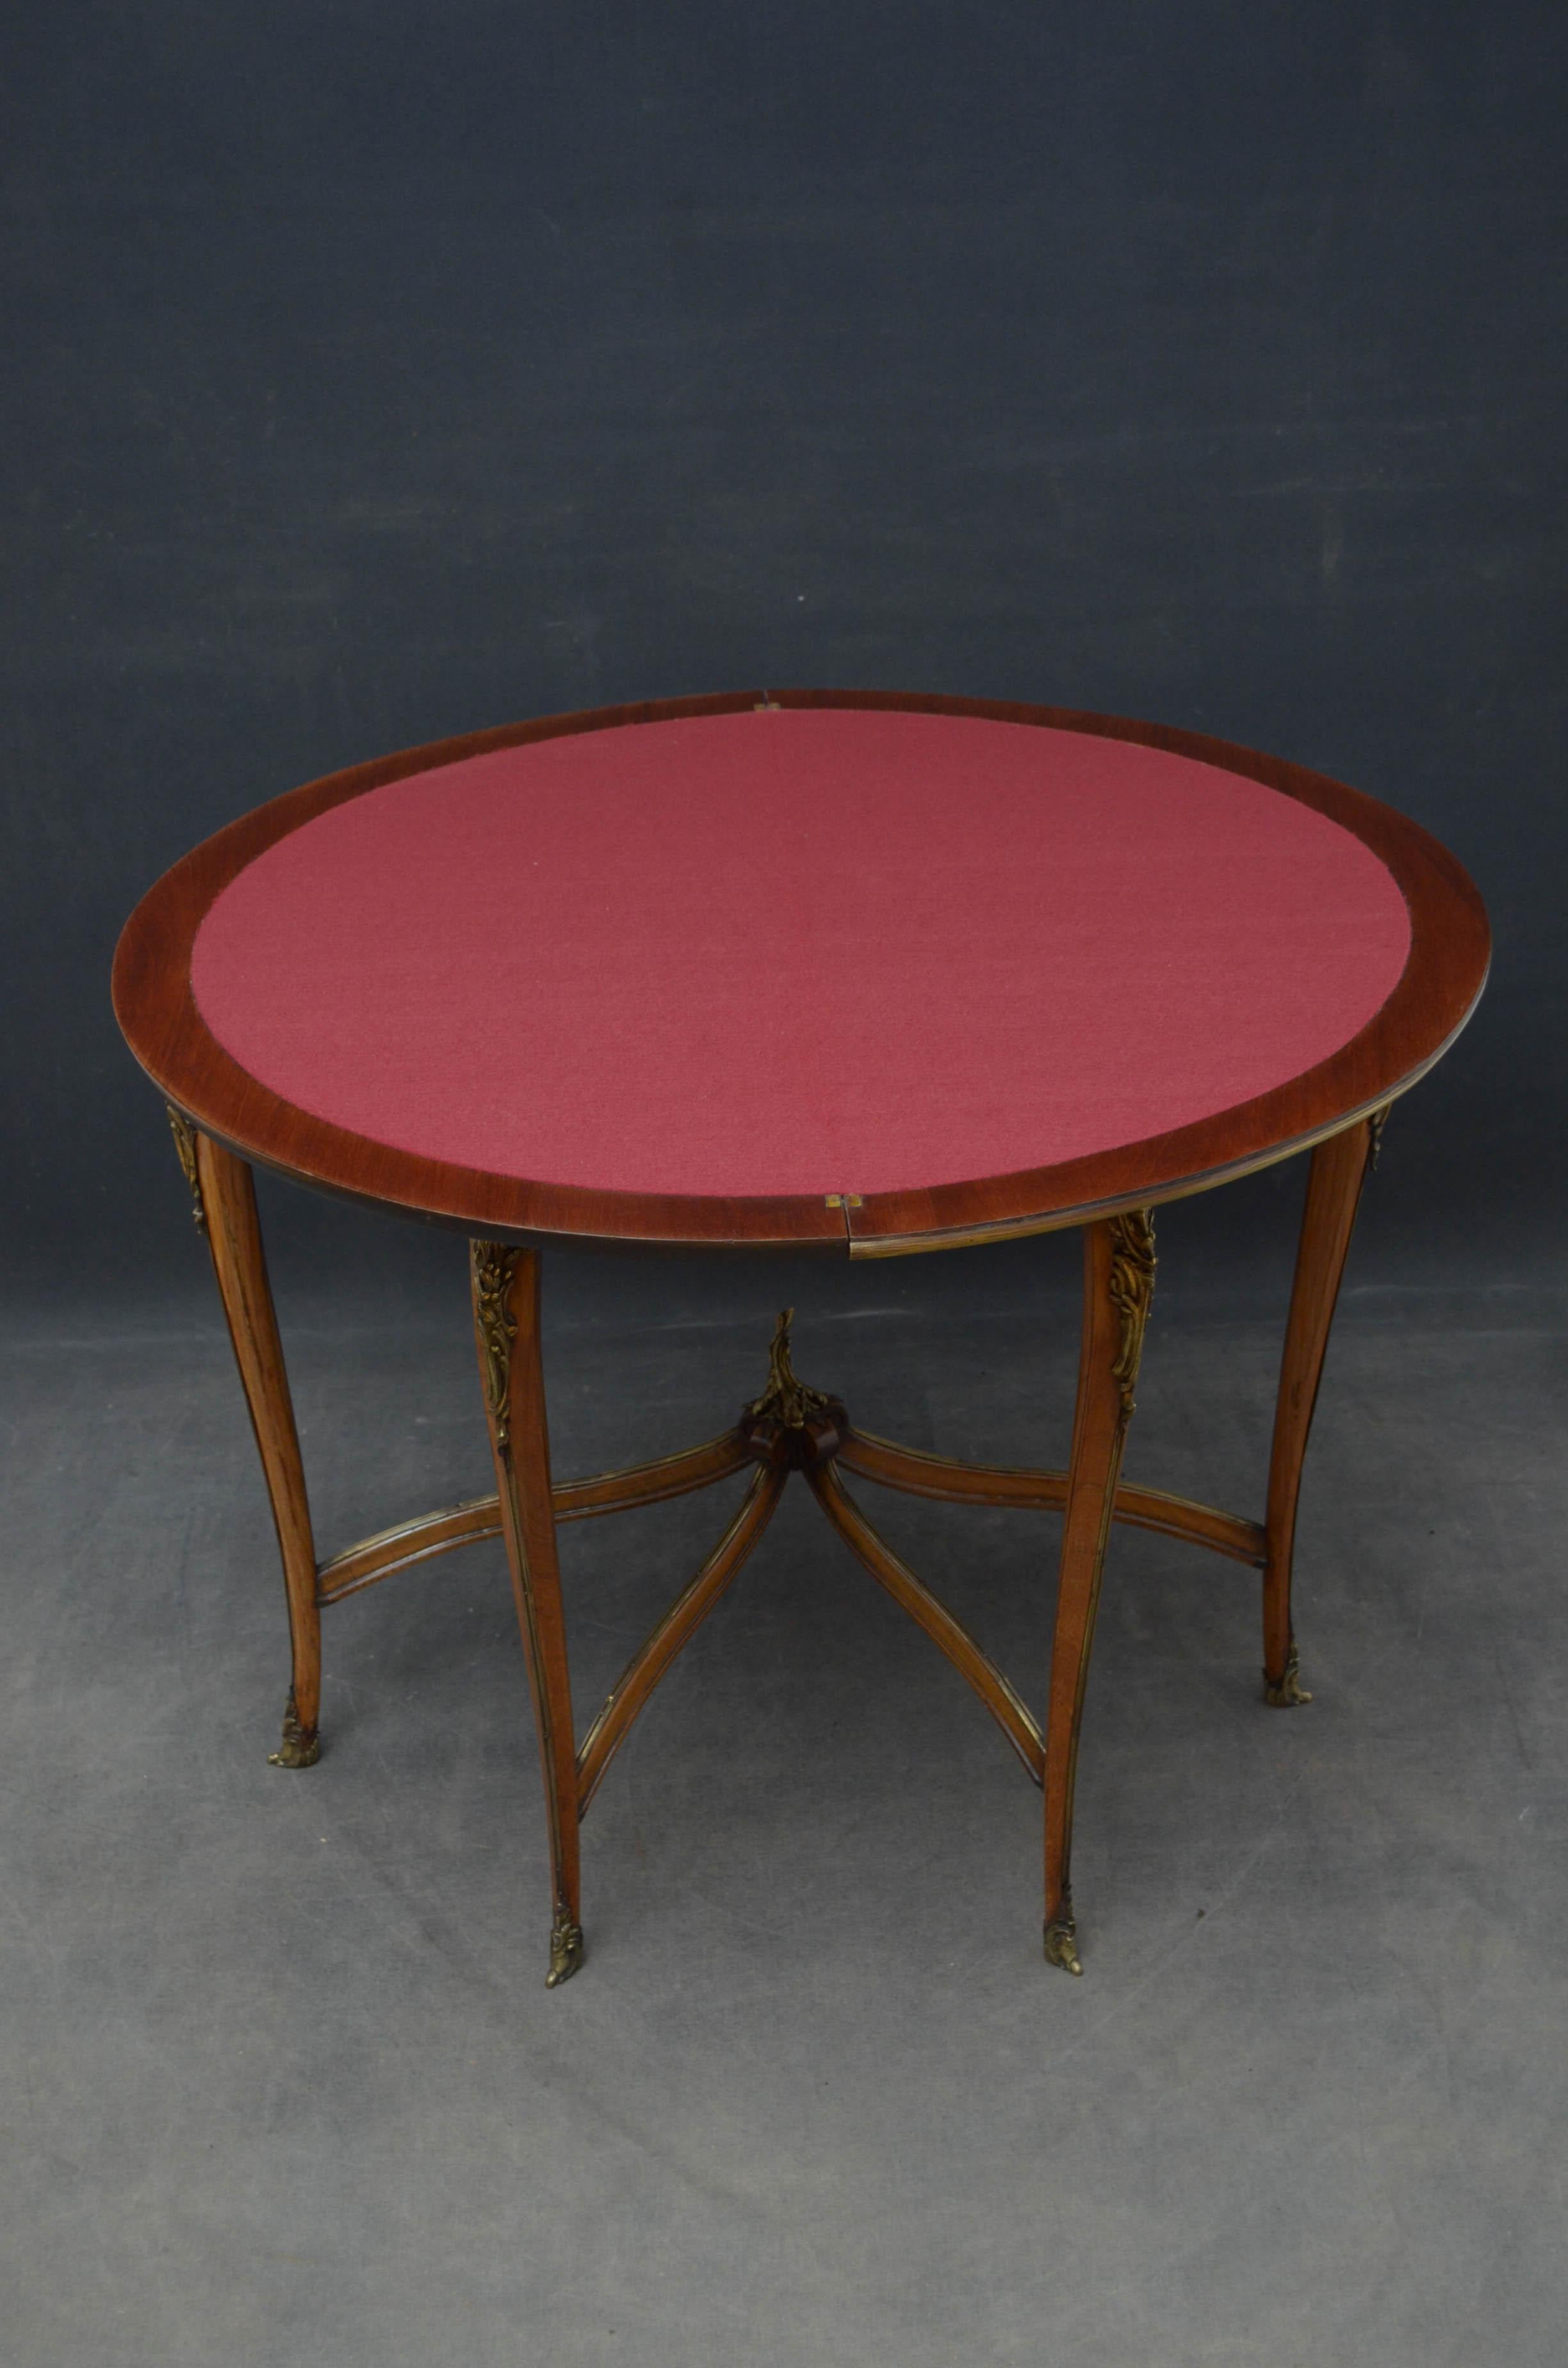 Late 19th Century French Rosewood Card Table / Hall Table